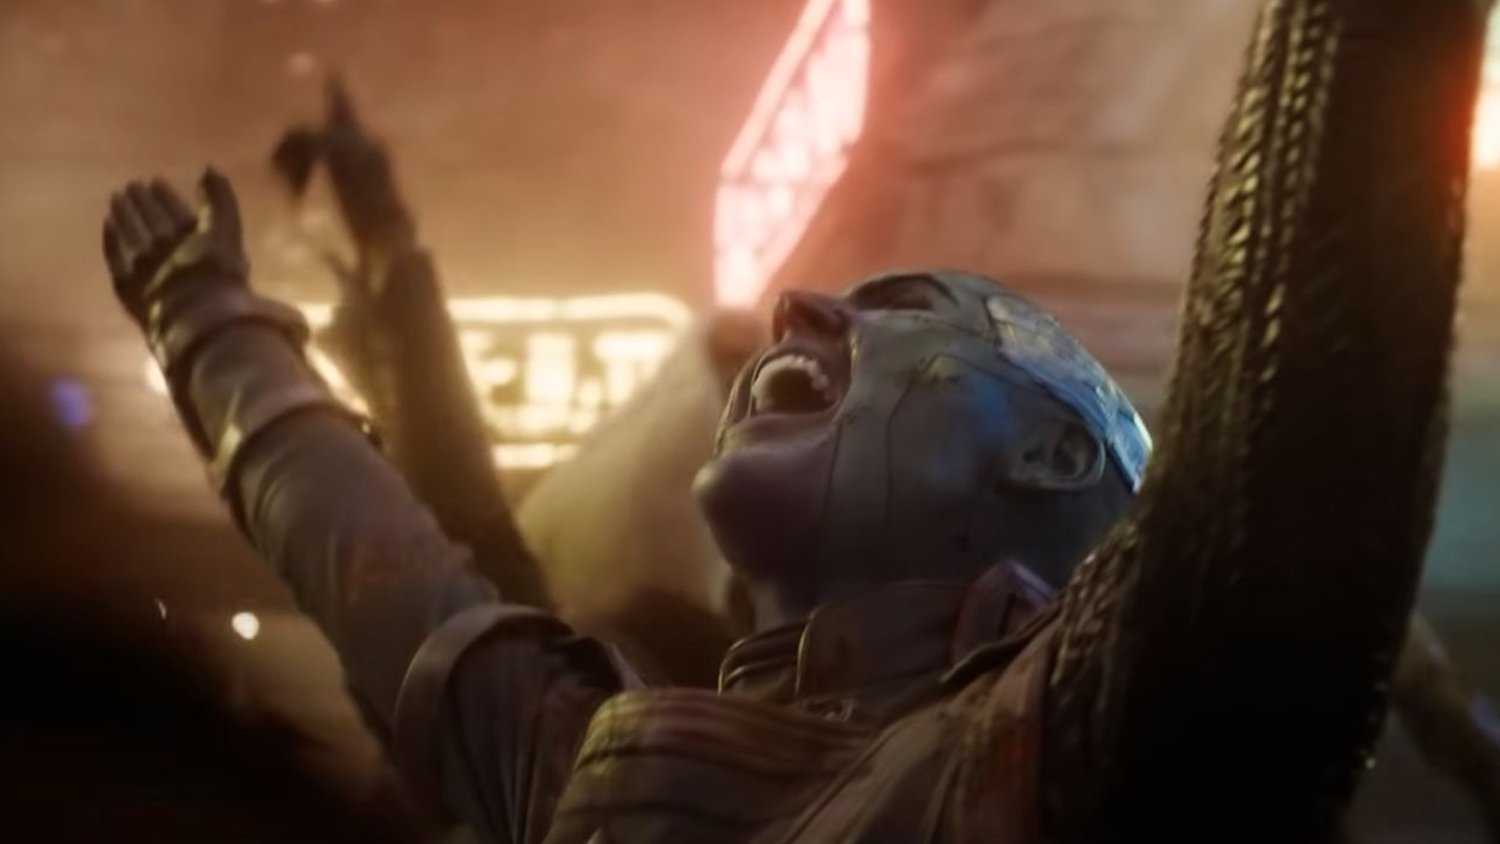 watch guardians of the galaxy vol 3 dog days needle drop song make florence welch break down in tears